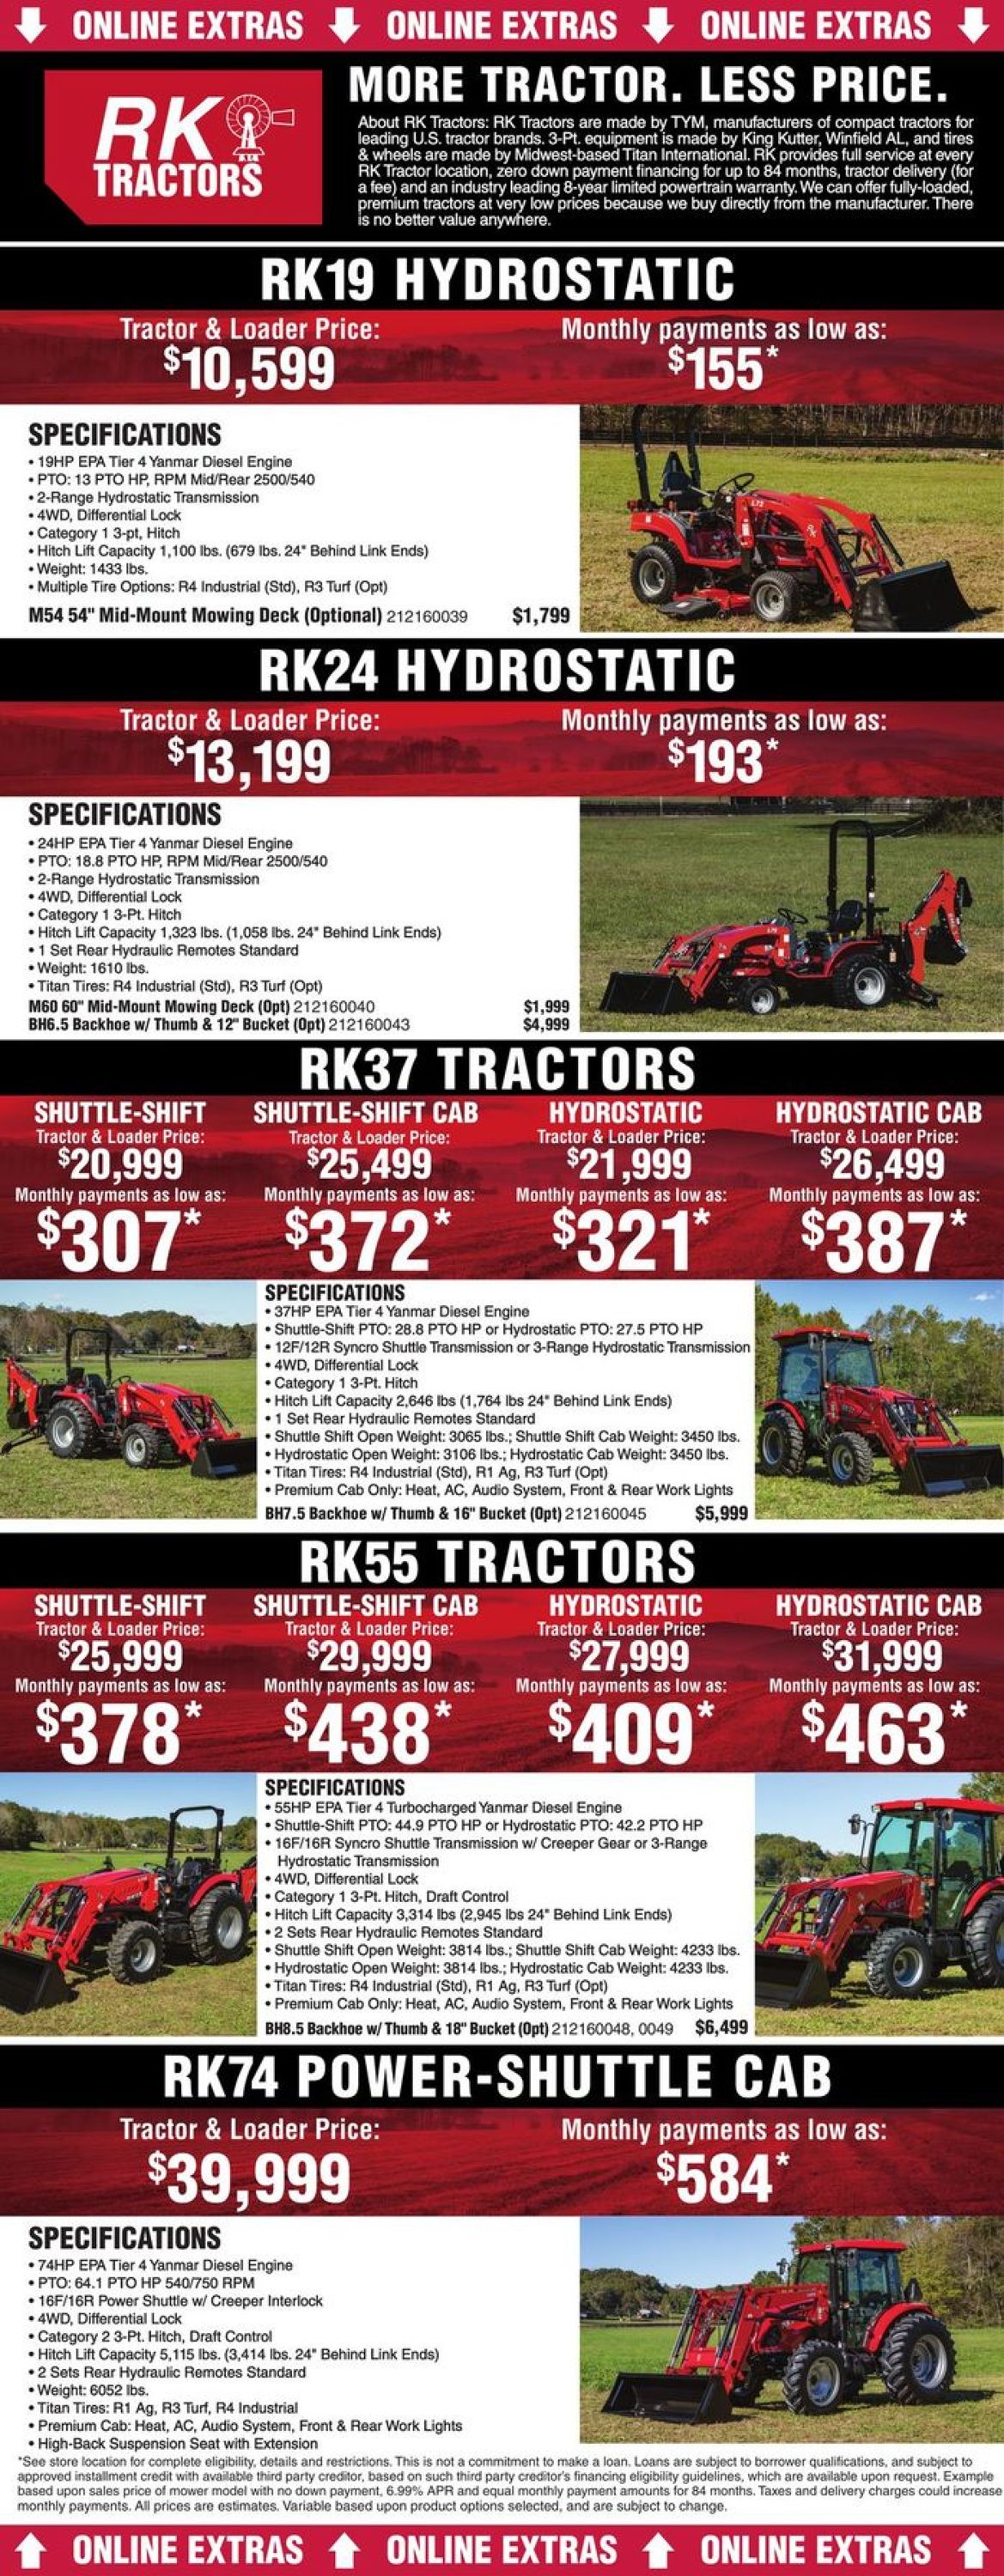 Catalogue Rural King - Black Friday Ad 2019 from 11/10/2019